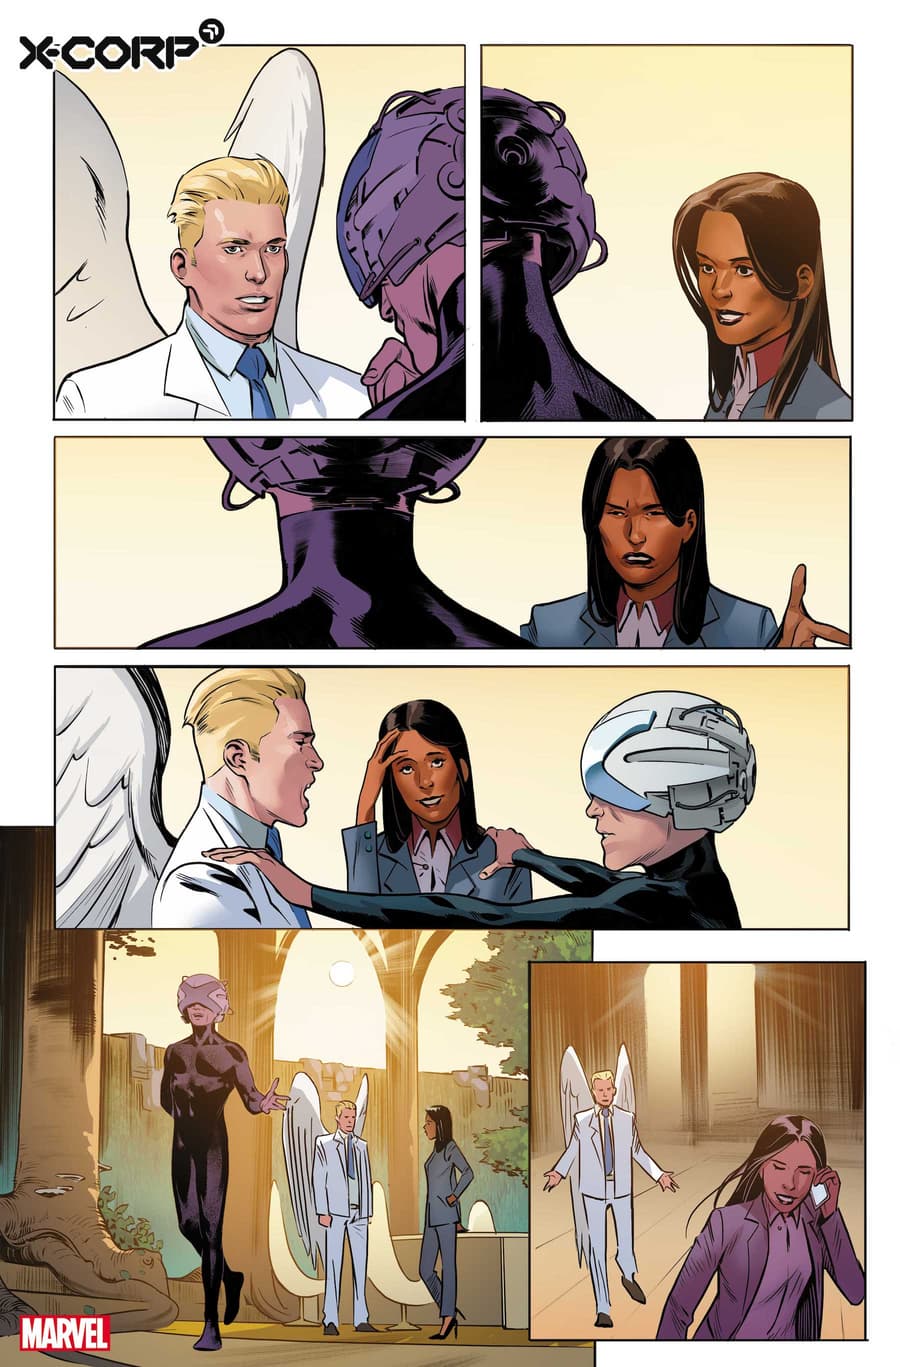 X-CORP #1 art by Alberto Foche with colors by Sunny Gho